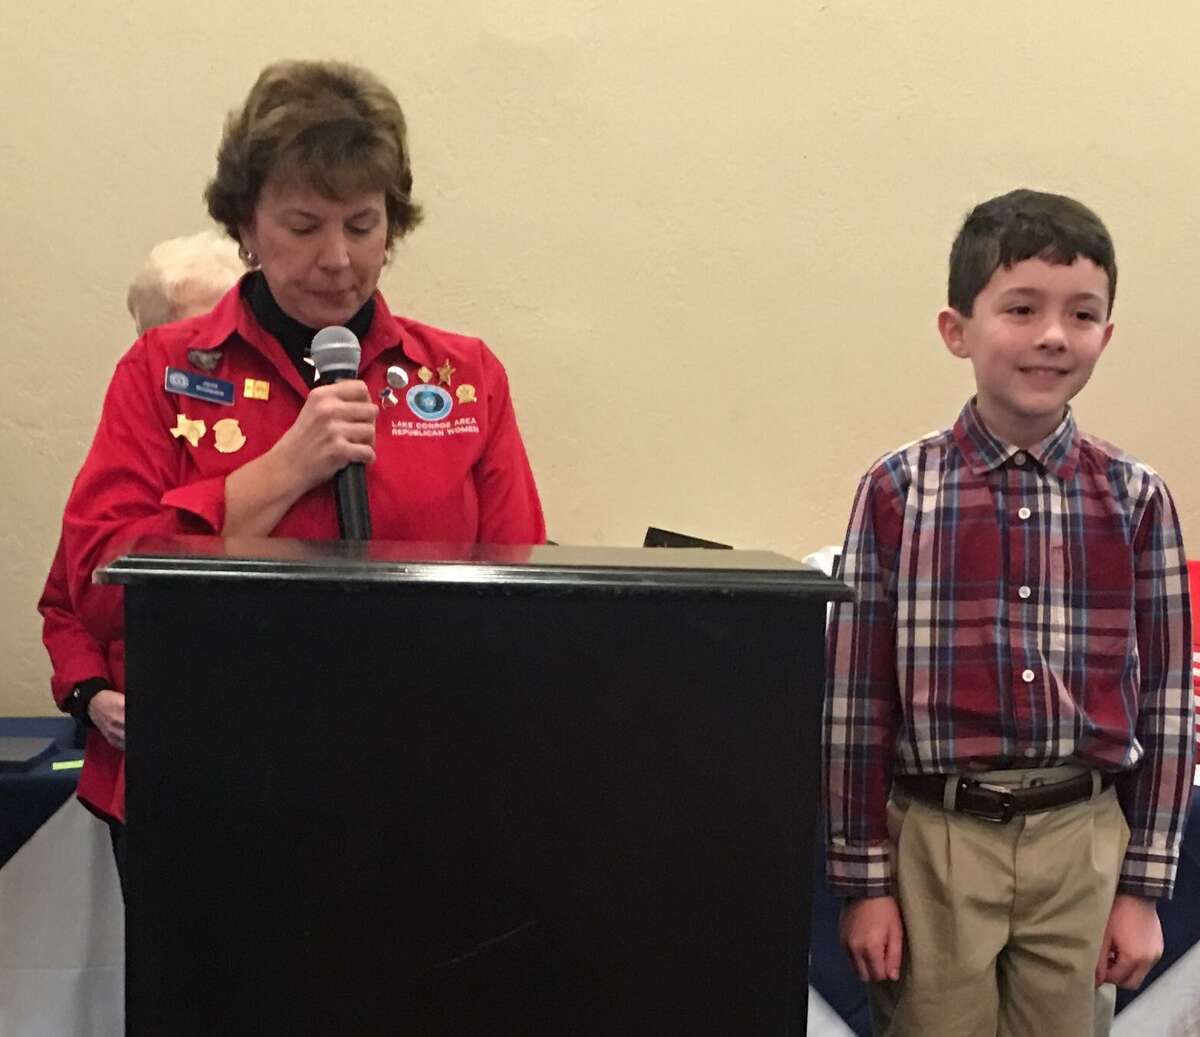 Lake Conroe Area Republican Women met recently at April Sound Country Club for the 2019 "My American Hero" Awards Luncheon. Fifteen third graders from Willis ISD and 20 fifth graders from Montgomery ISD were honored at this event for their essays describing who was his or her "American Hero" and why. Shown here is LCARW member Janis Boulware presenting Adian Glasglow (from Mel Parmley Elementary School) an award for his essay on President George Herbert Walker Bush.